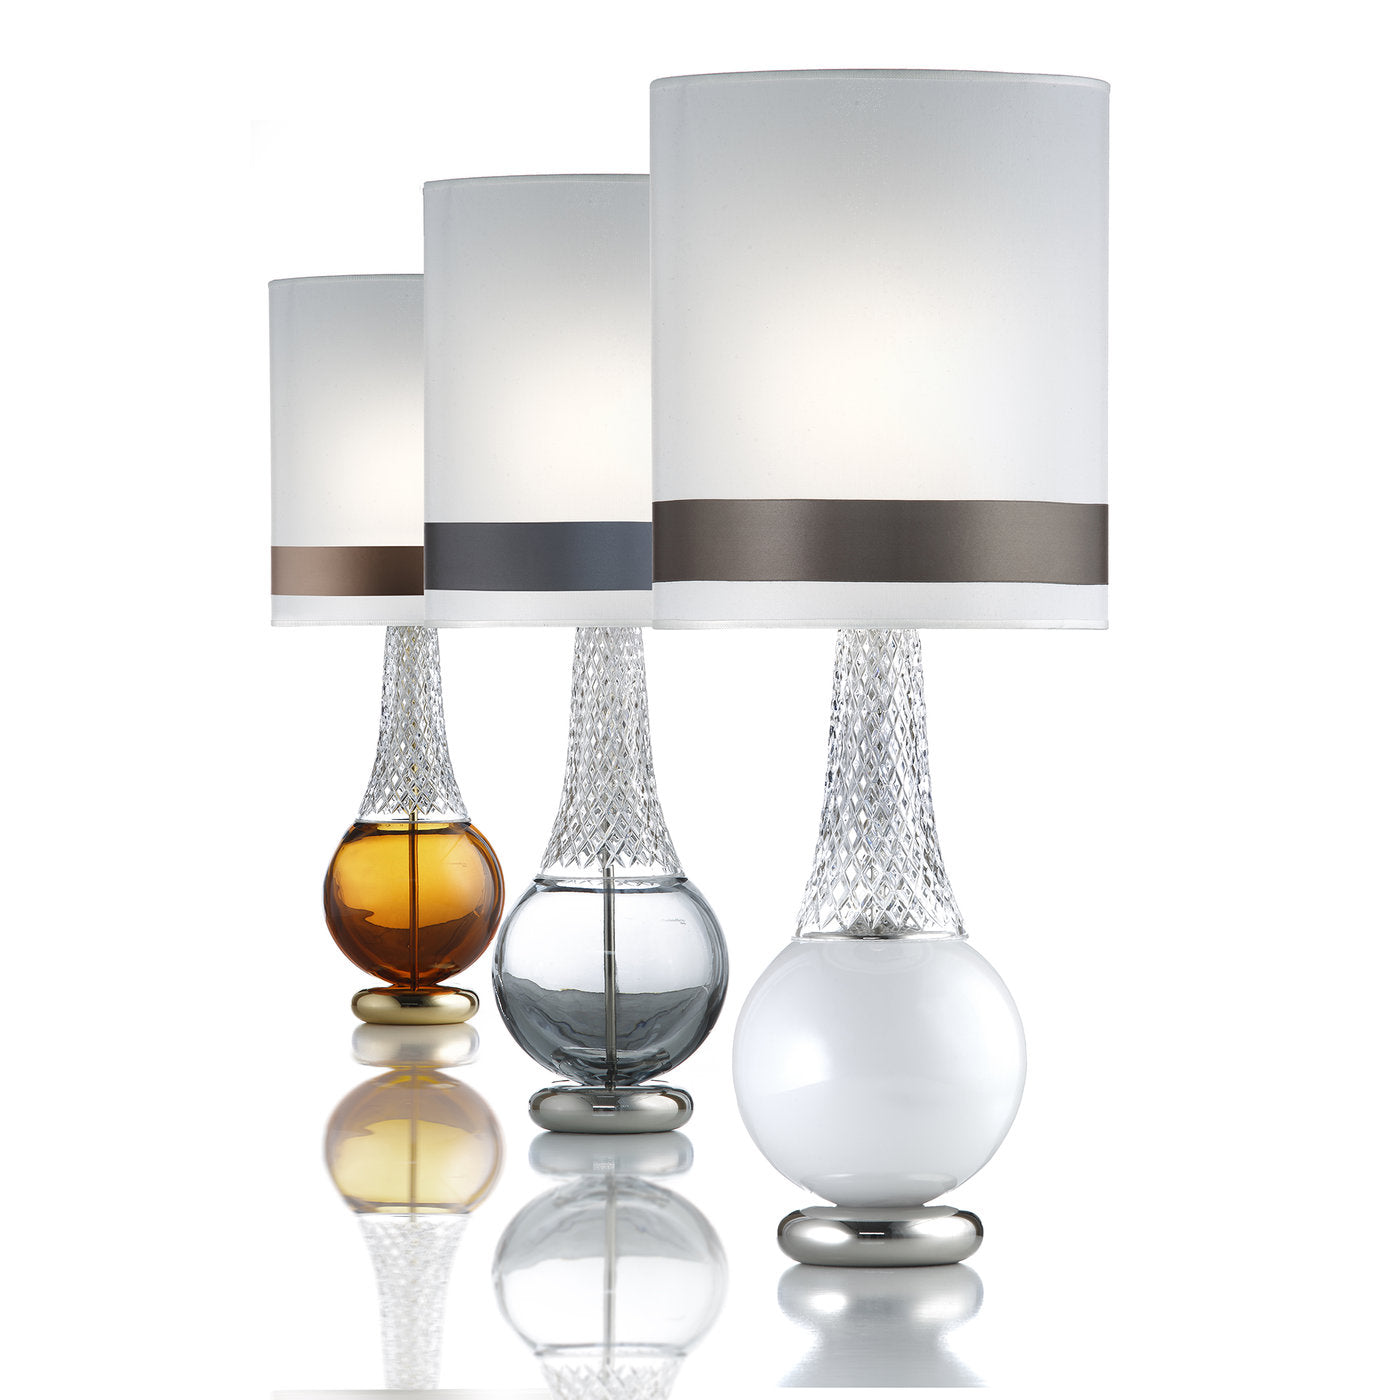 Lady Crystal White Table Lamp - Alternative view 1